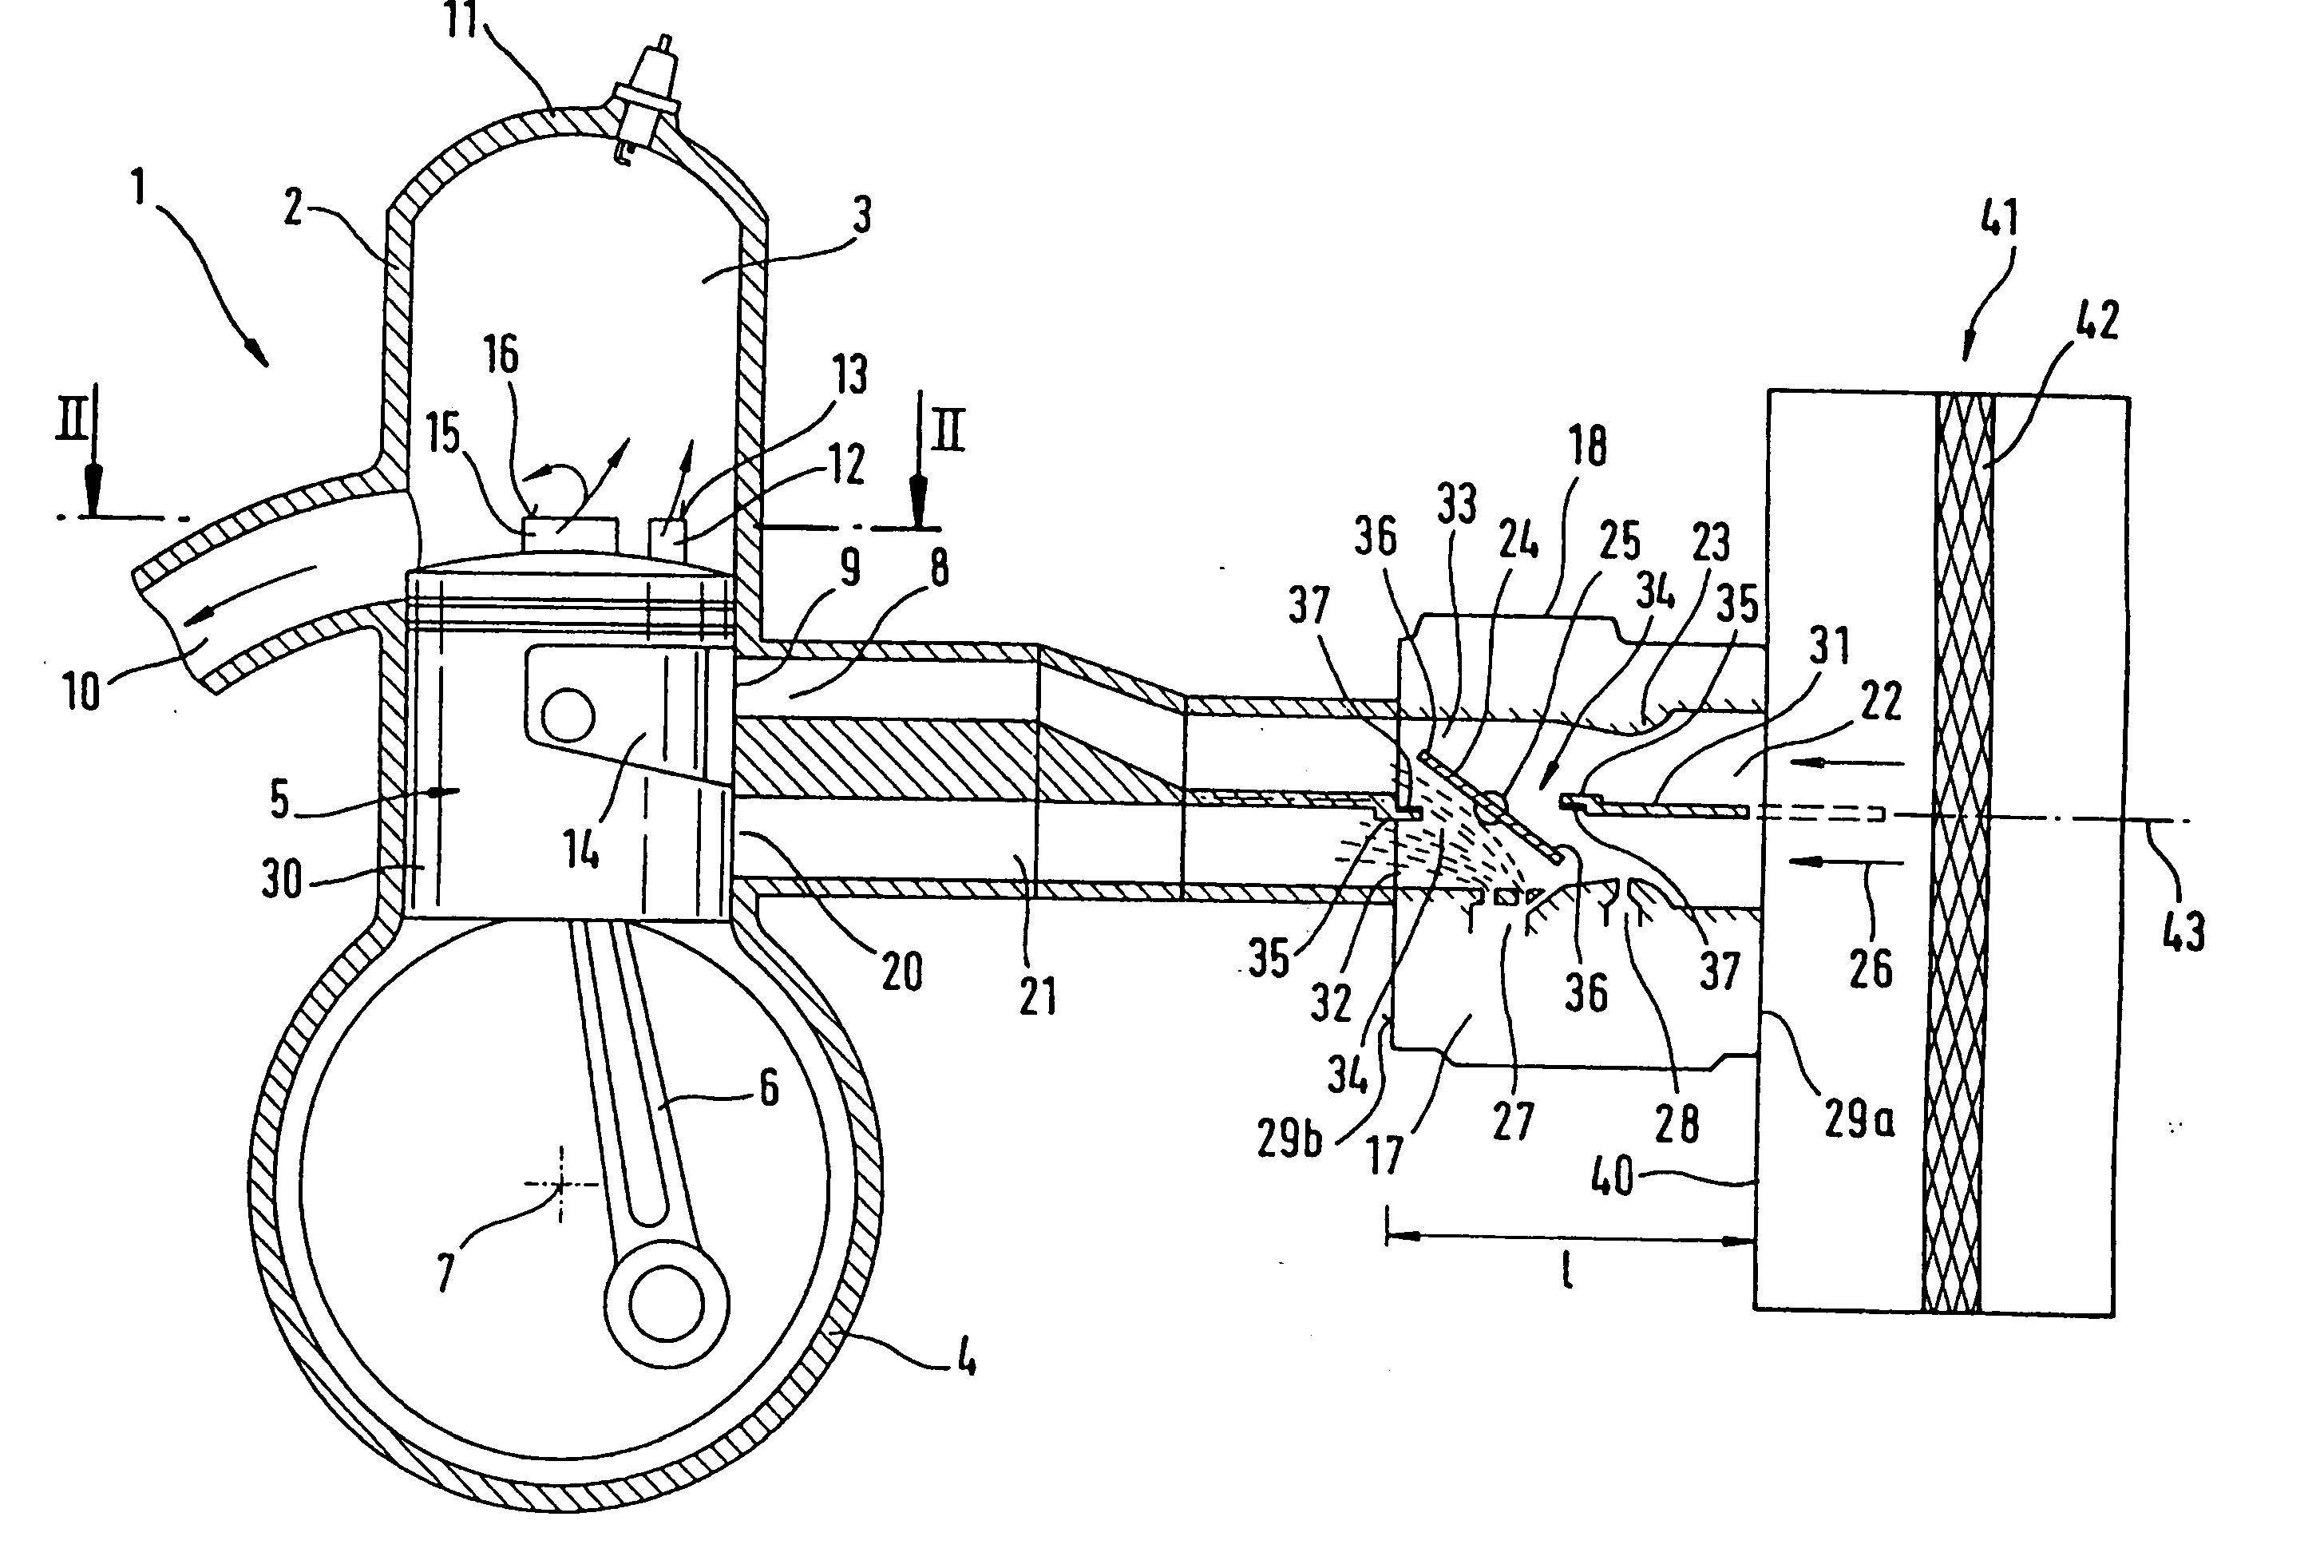 Two-cycle engine with forward scavenging air positioning and single-flow carburetor